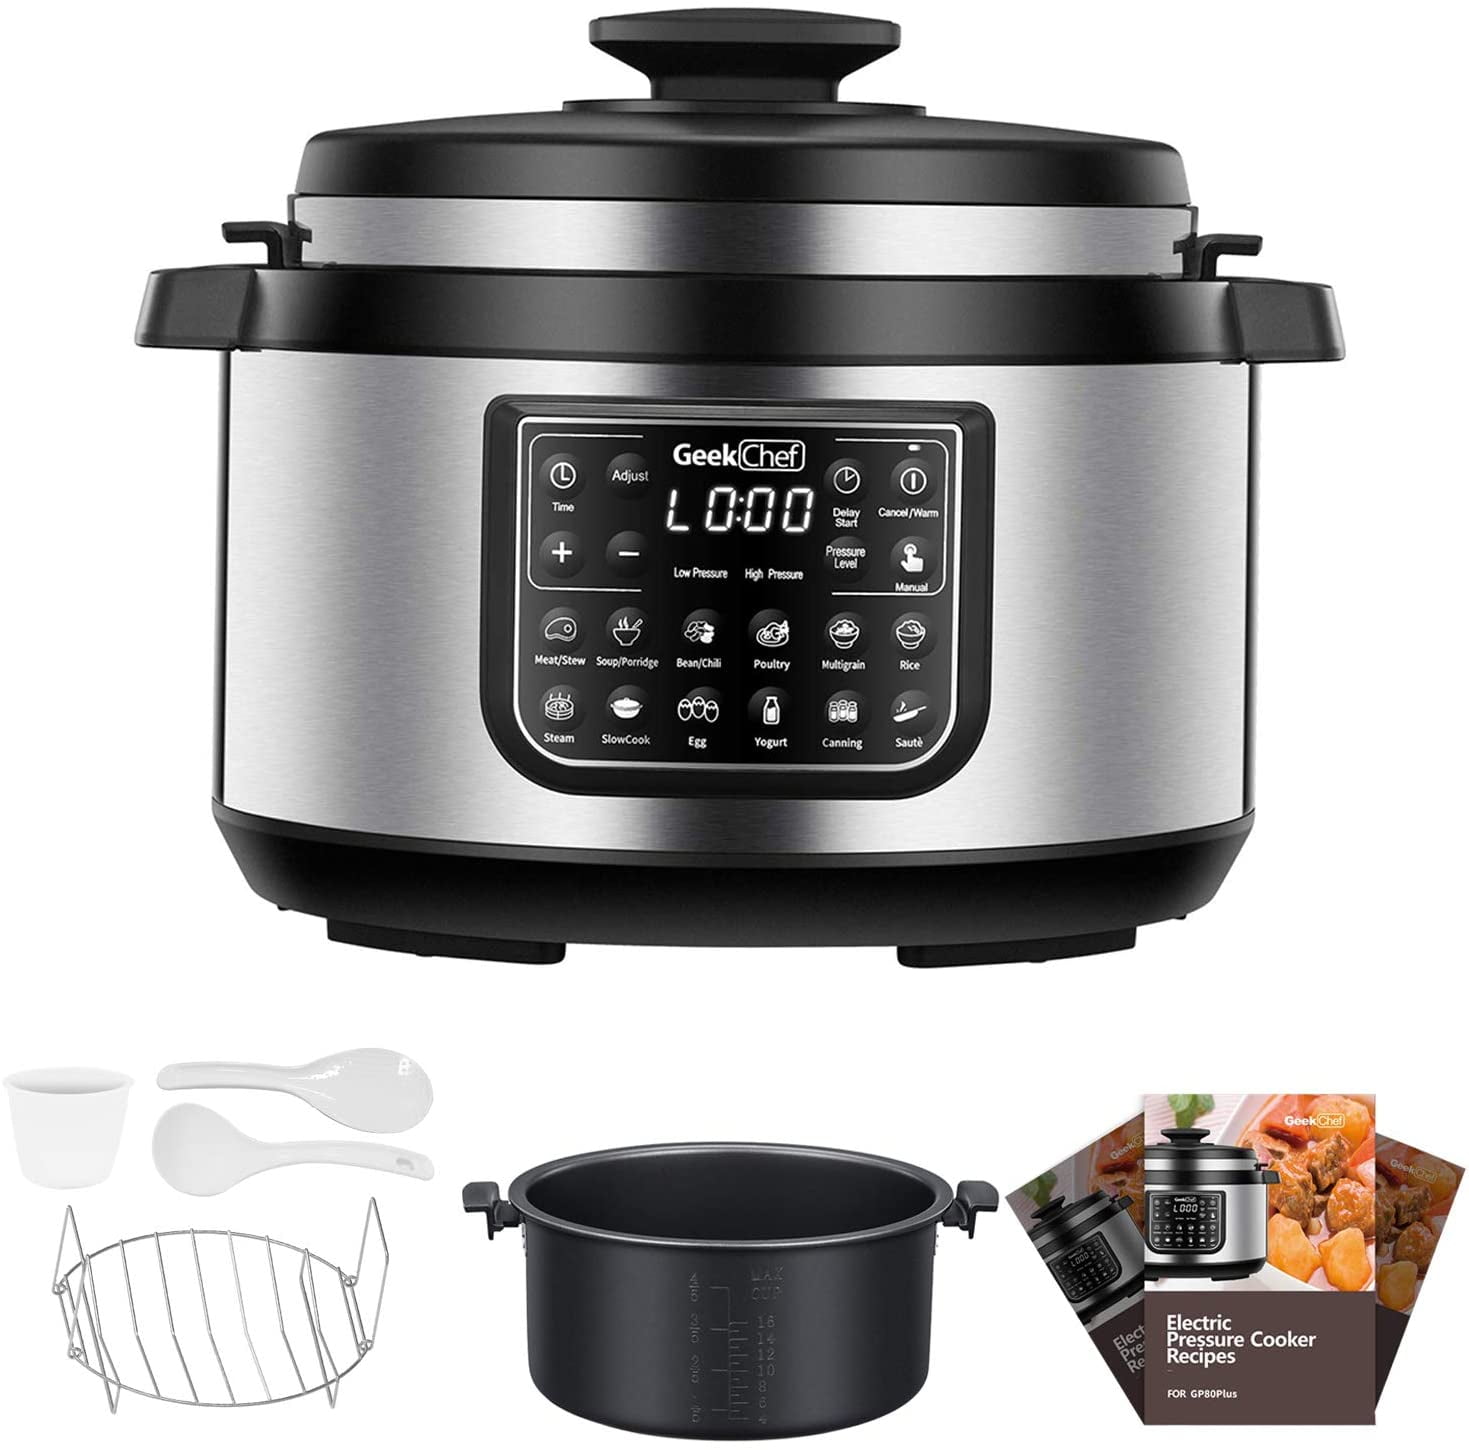 Galanz 8-in-1 Multi Cooker with Air Fry, Sous Vide, Rice, Sauté, Slow Cook,  Steam, Roast, & Grill - Removable 8 QT Cooking Bowl, 8 Pre-Set Programs